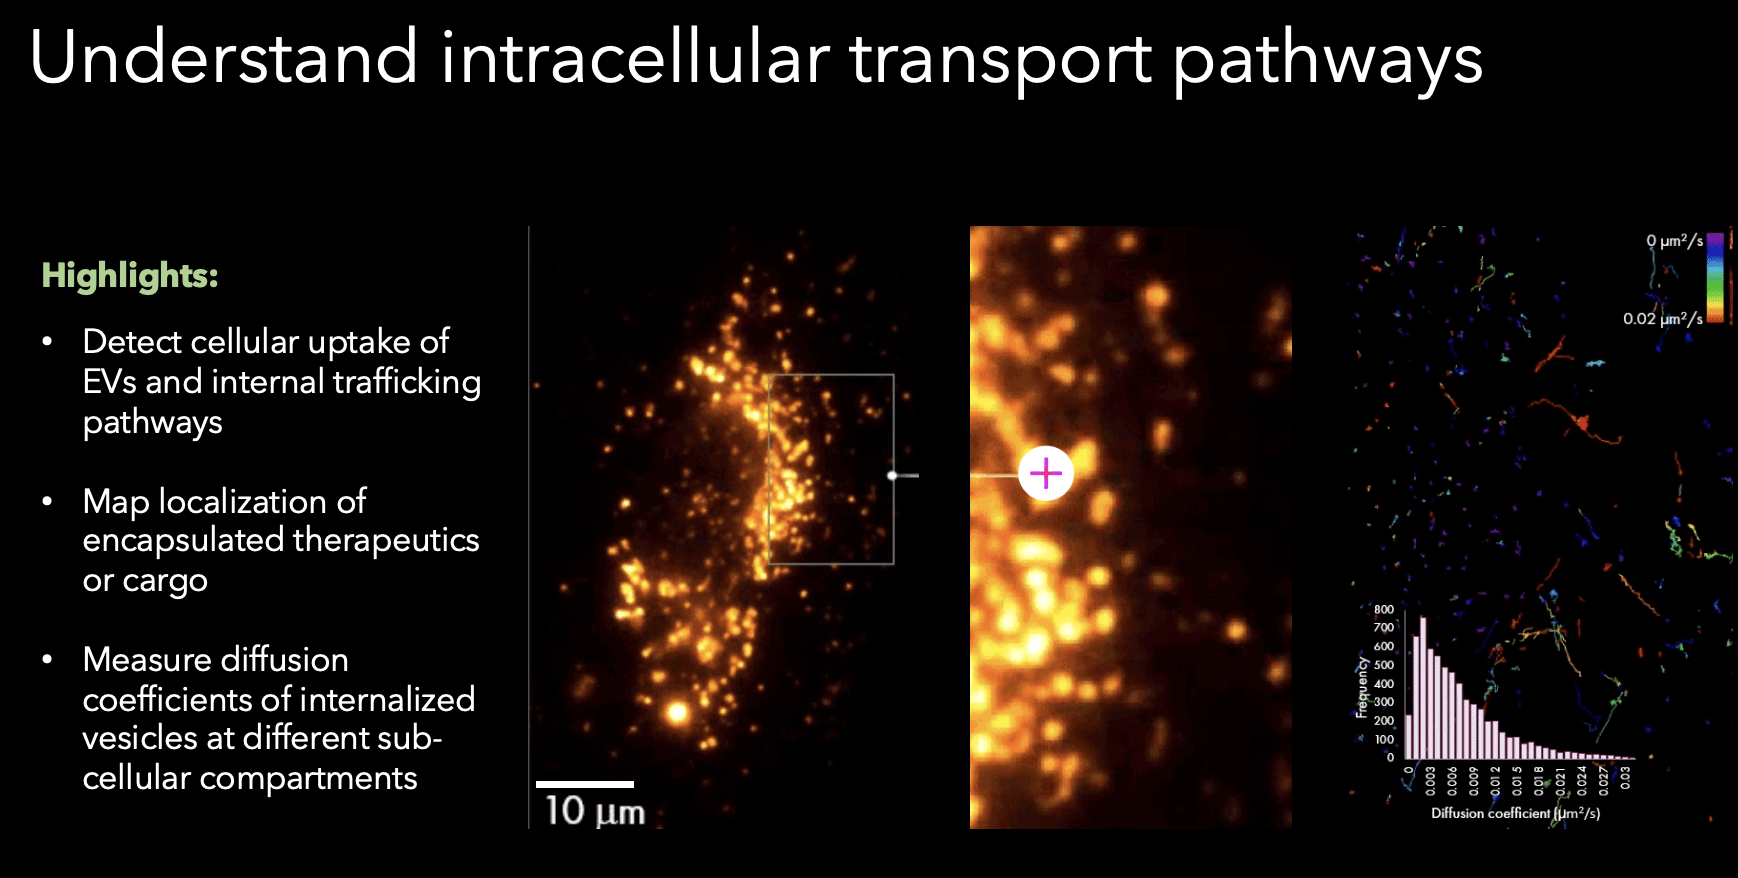 Tracking of extracellular vesicles EVs NHS-AF488 within a human umbilical vein endothelial cell. Sample from Prof. Christopher Gregory, University of Edinburgh.